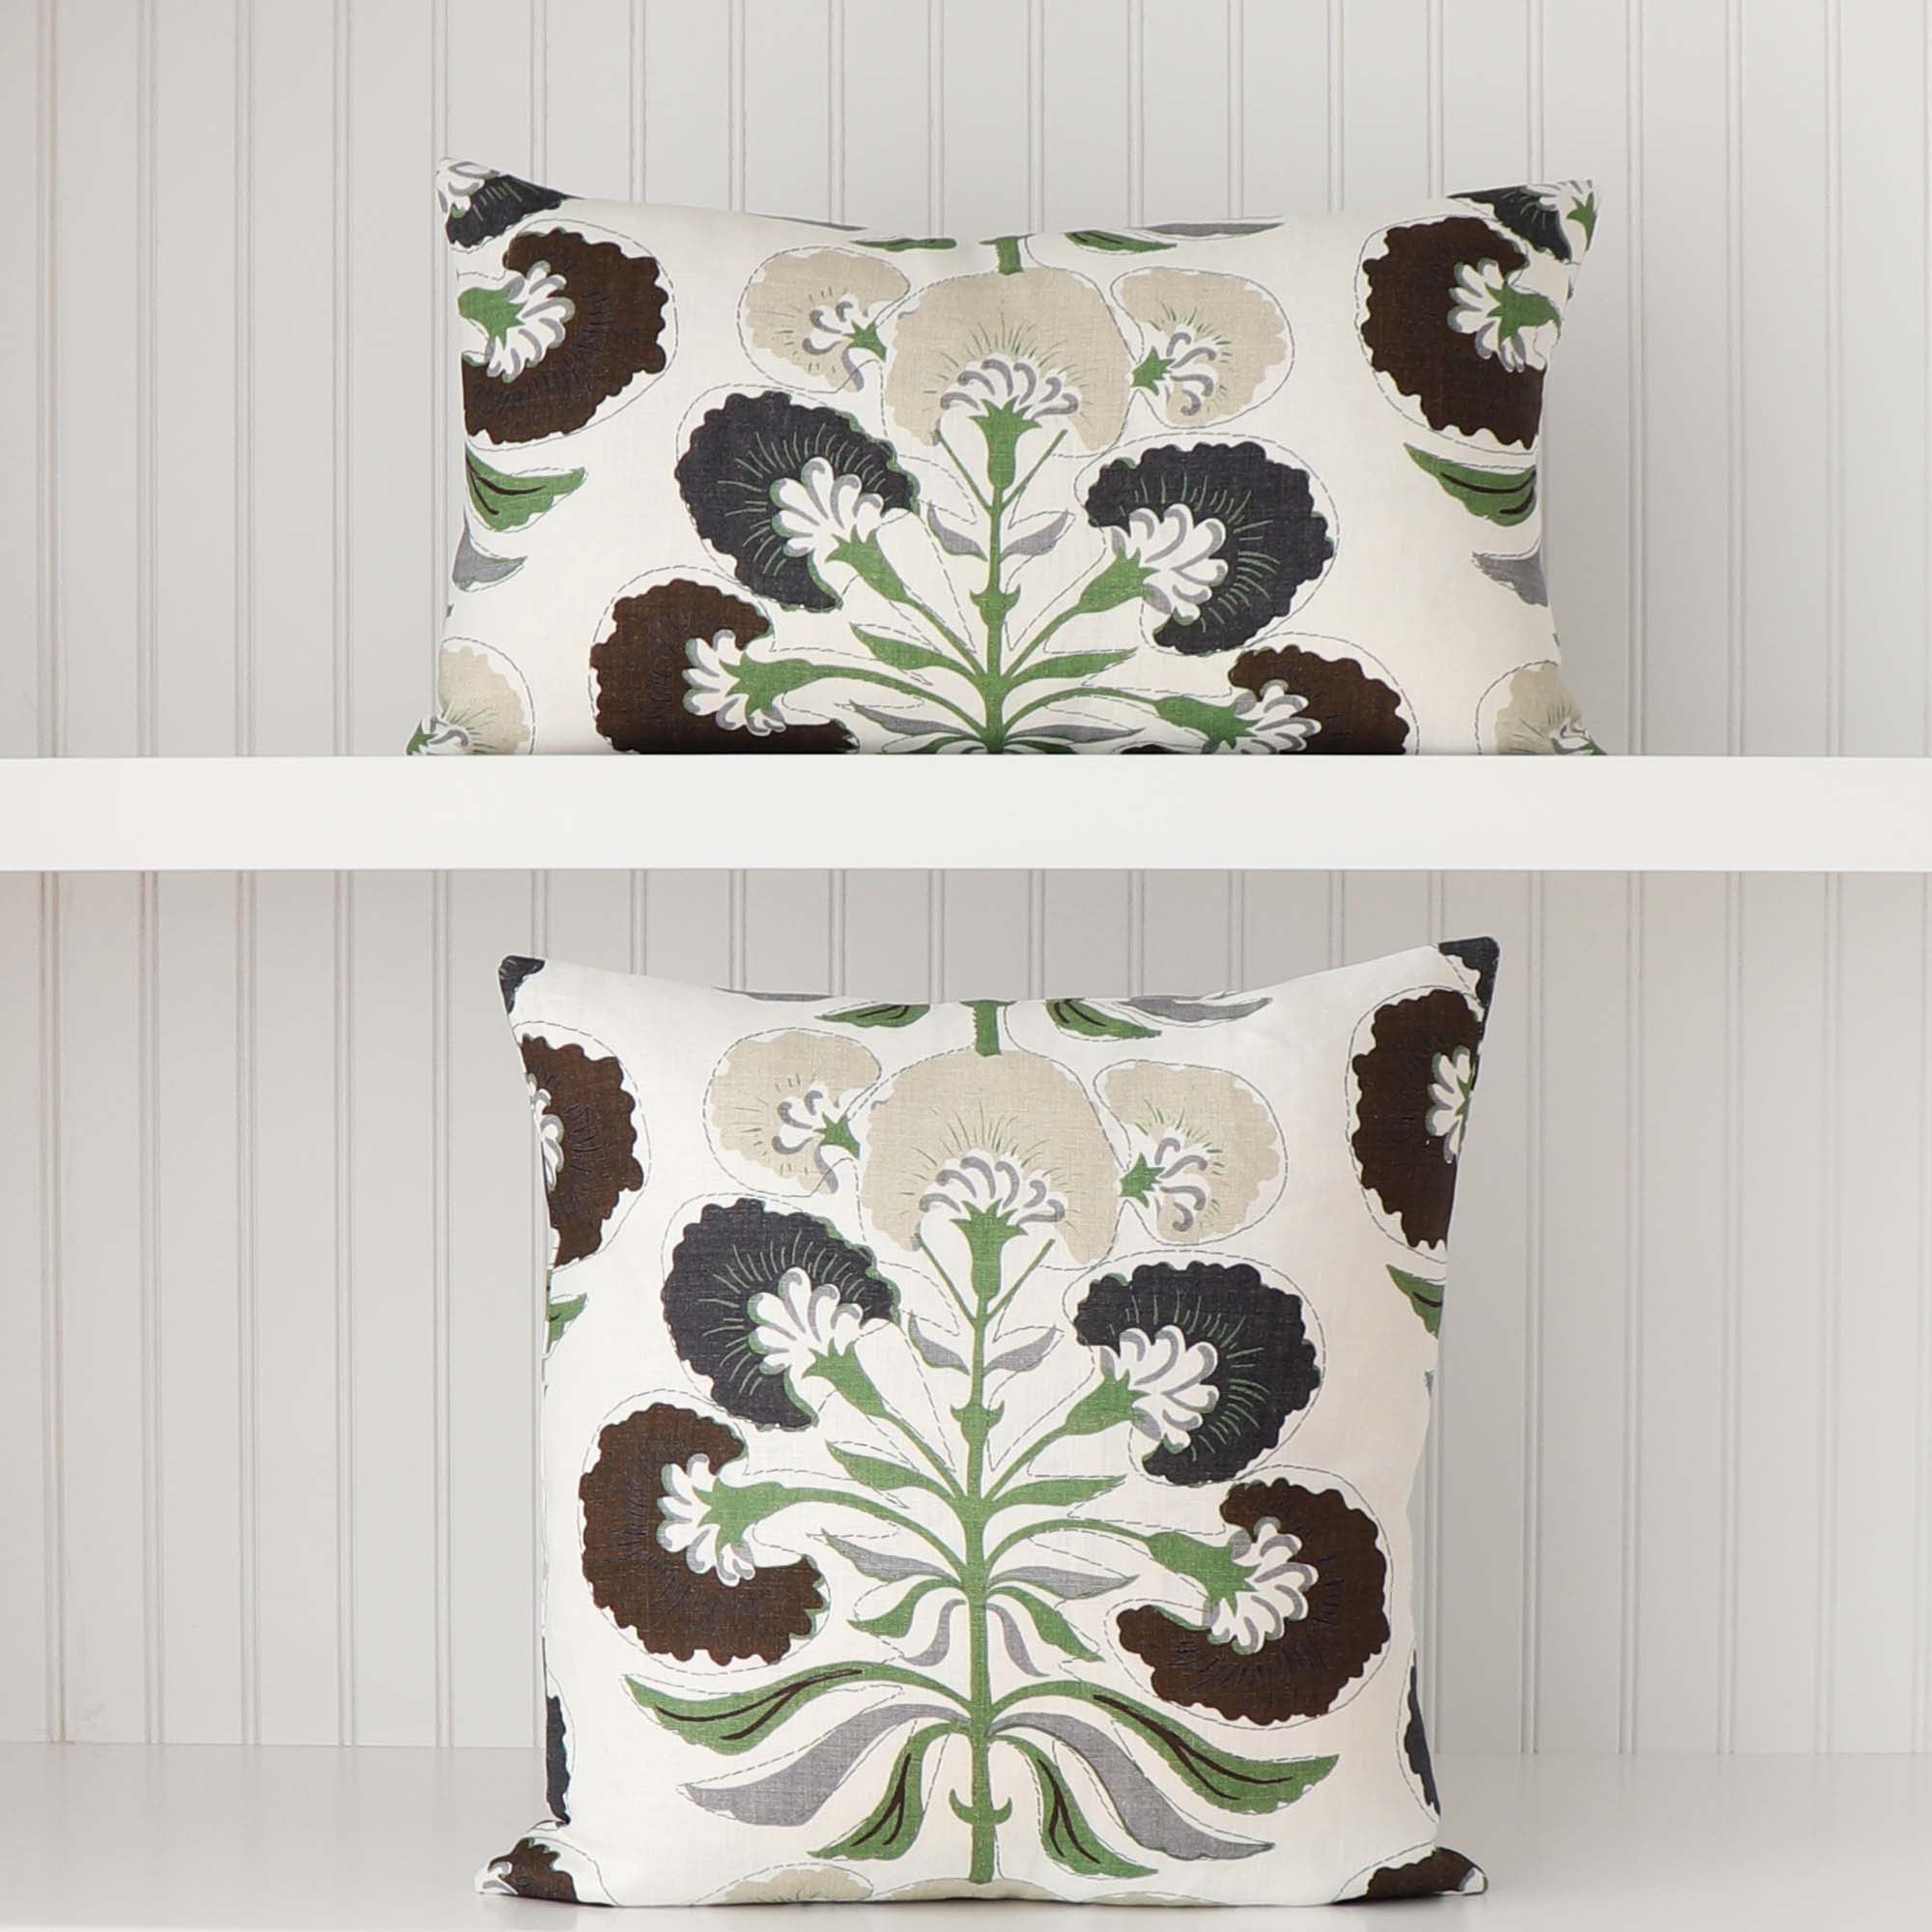 Thibaut Tybee Tree Black and Green Floral Block Print Designer Linen Luxury Decorative Throw Pillow Cover Square and Lumbar Sizes